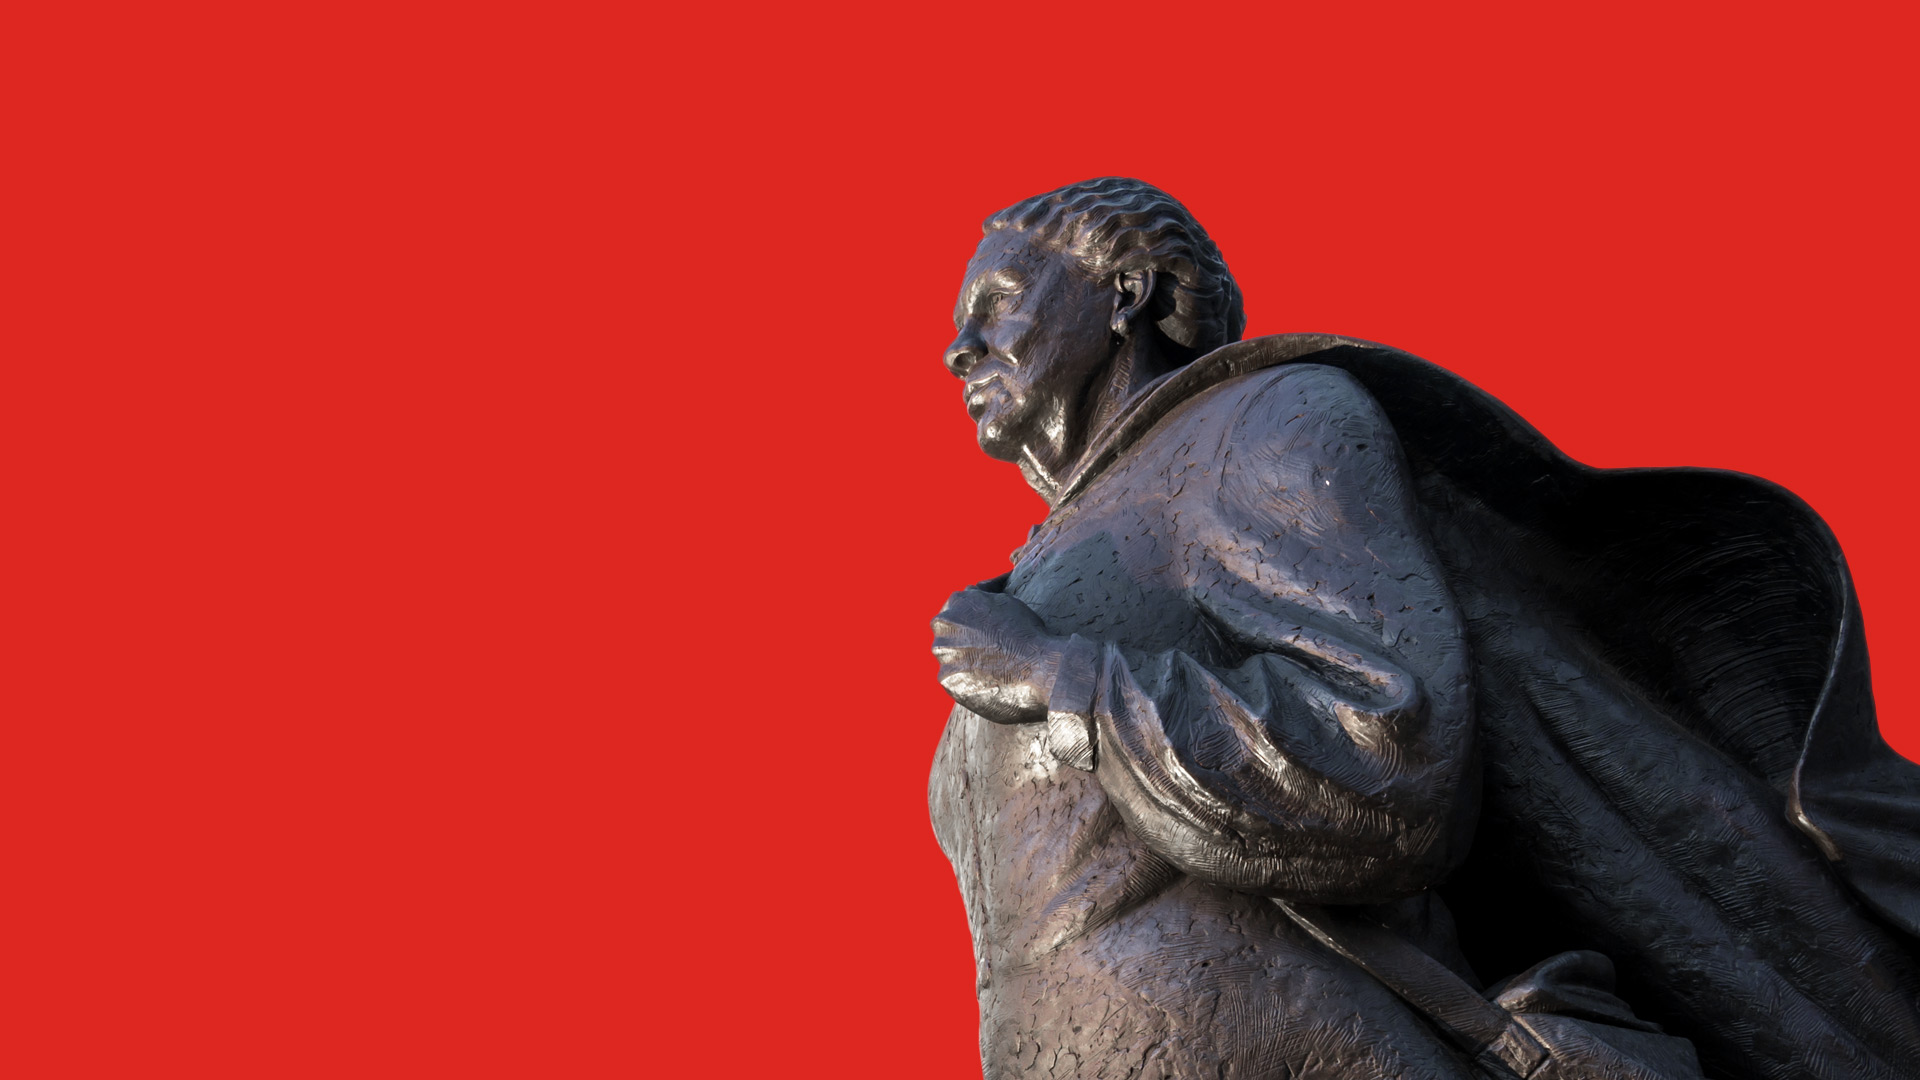 Statue on red background